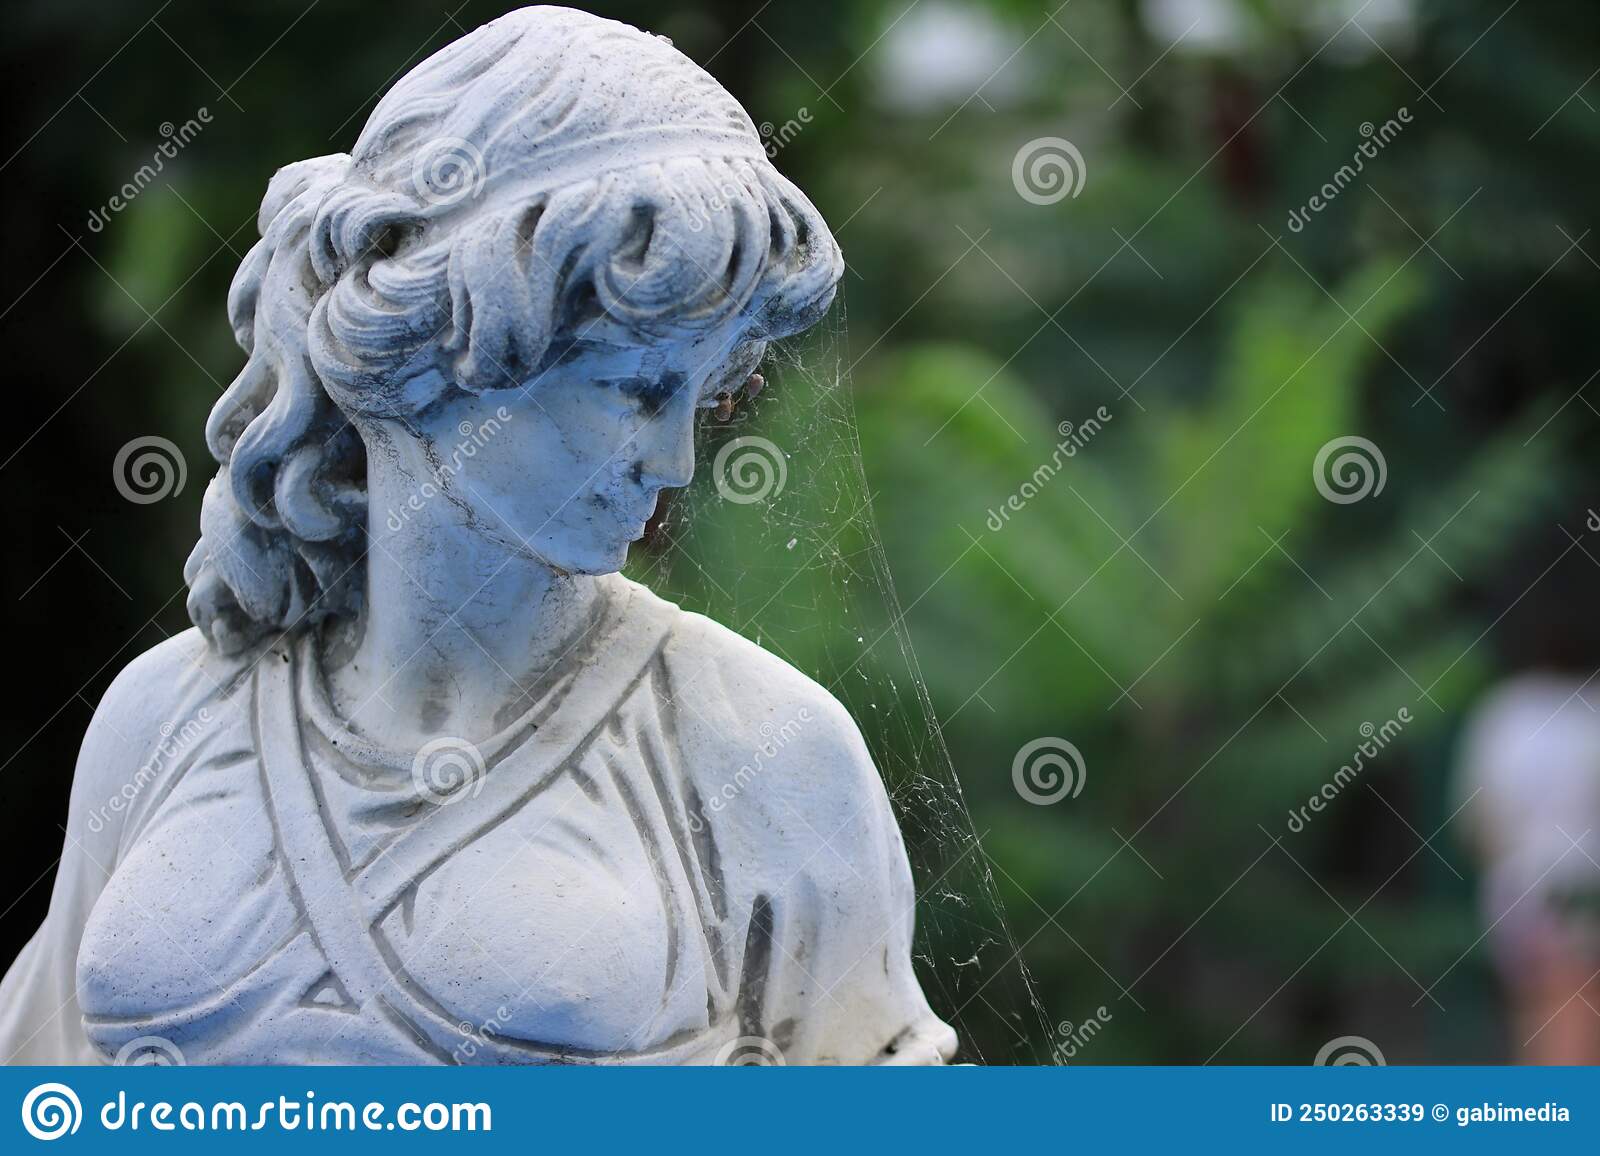 Old statue abandoned in a garden